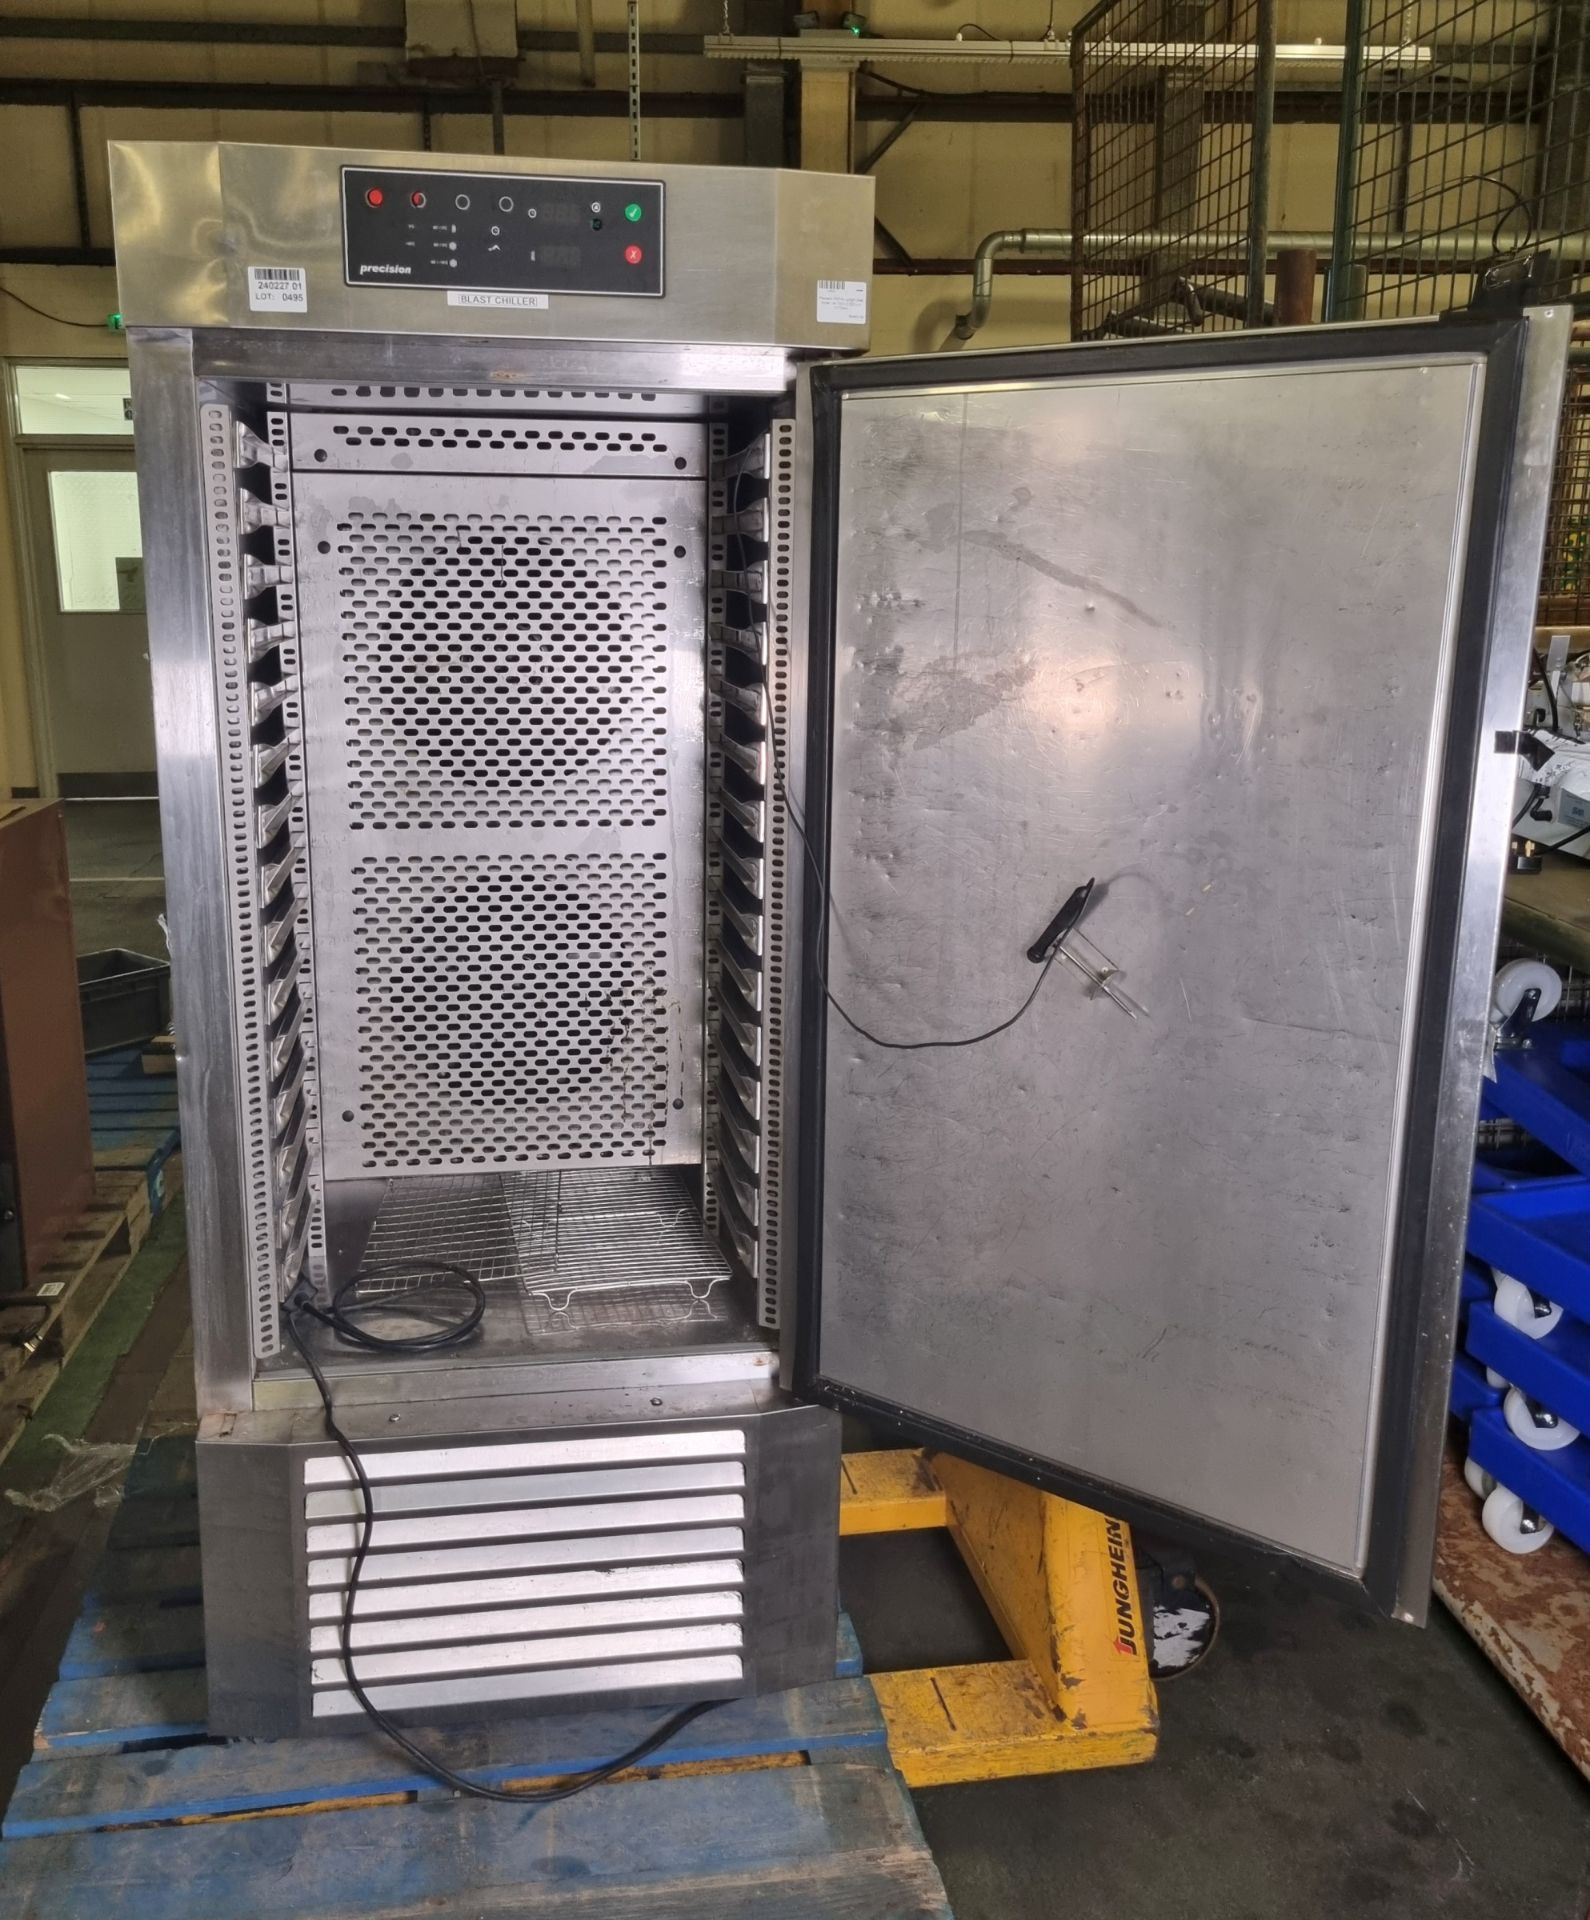 Precision PCF40 upright blast chiller - W 720 x D 820 x H 1770mm - Image 4 of 5